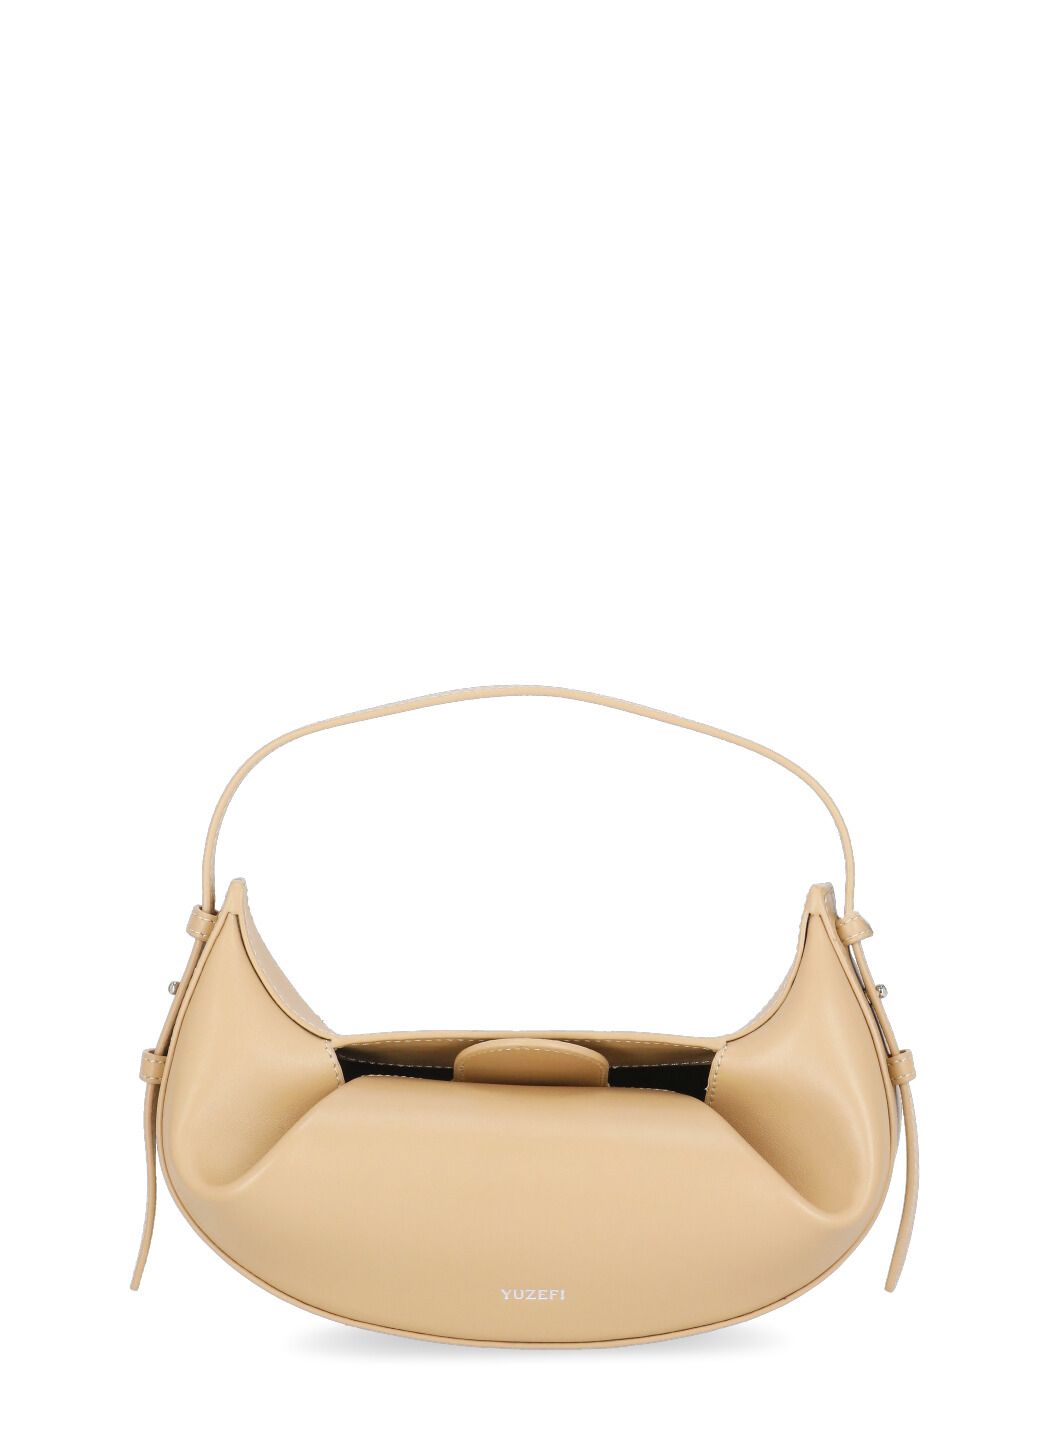 Mini Fortune Cookie Bag in Beige Leather